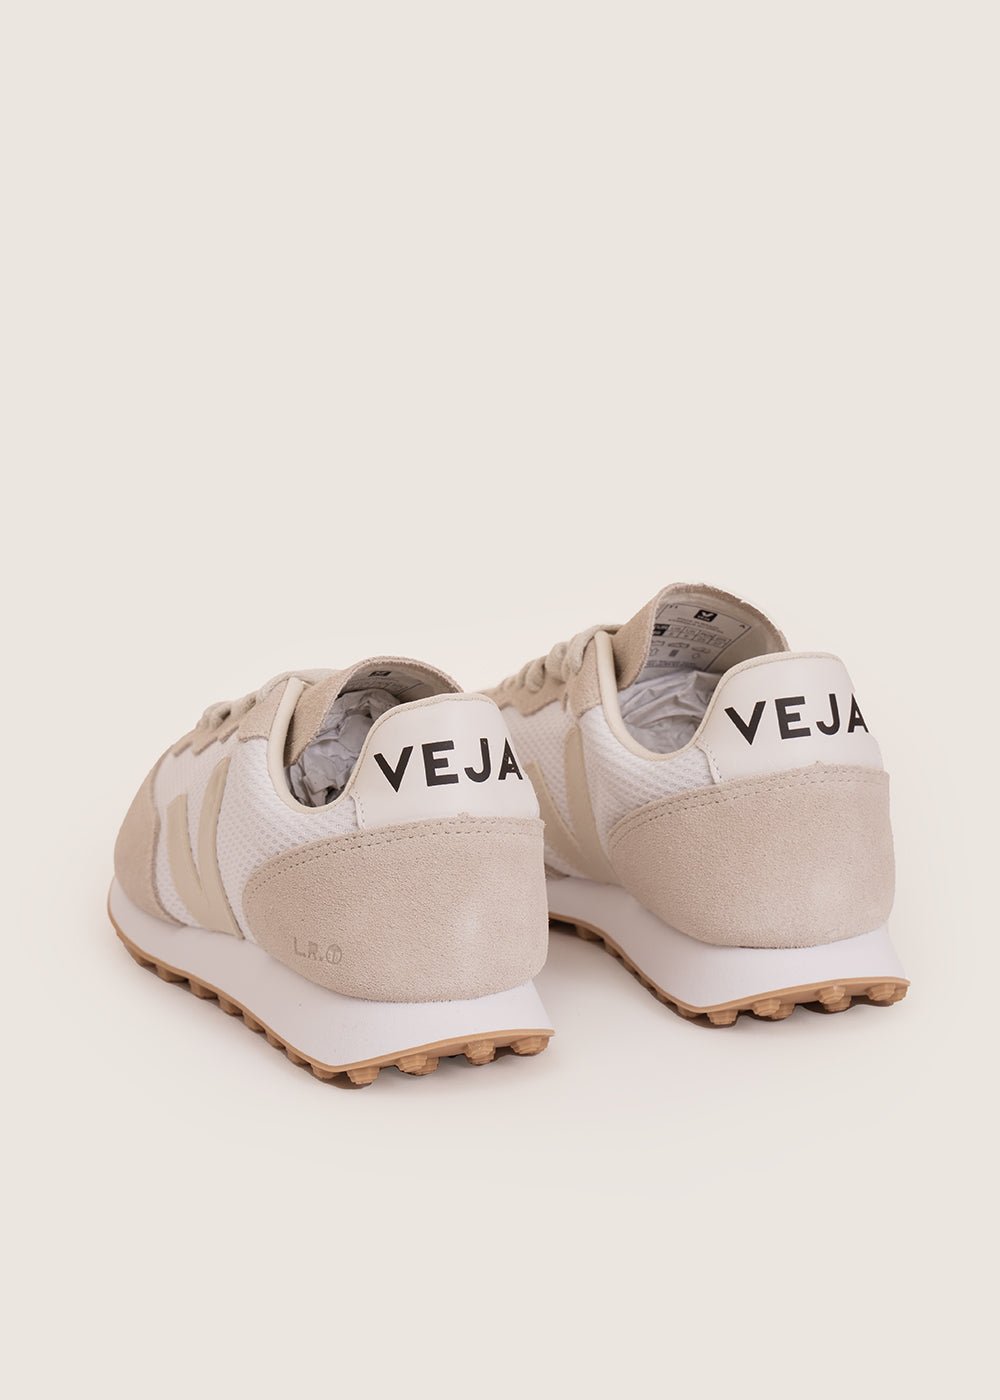 Veja White Natural Pierre Rio Branco Sneakers - New Classics Studios Sustainable Ethical Fashion Canada